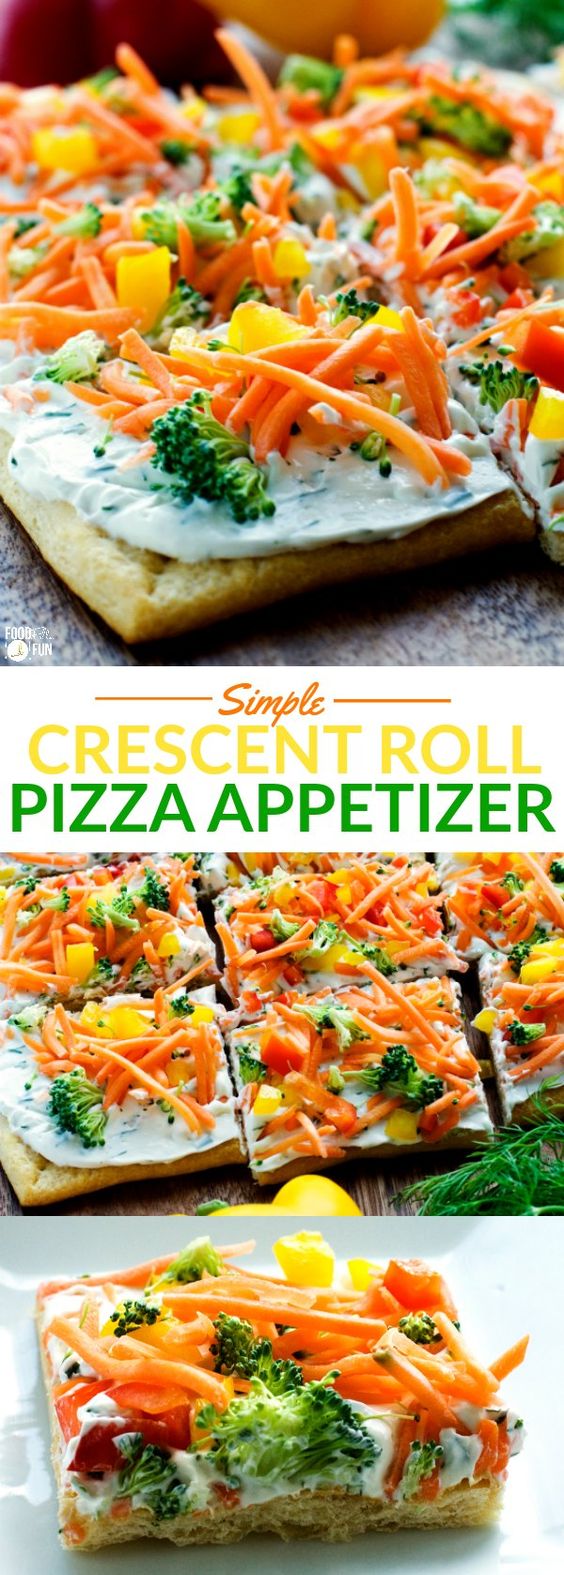 SIMPLE CRESCENT ROLL PIZZA APPETIZER